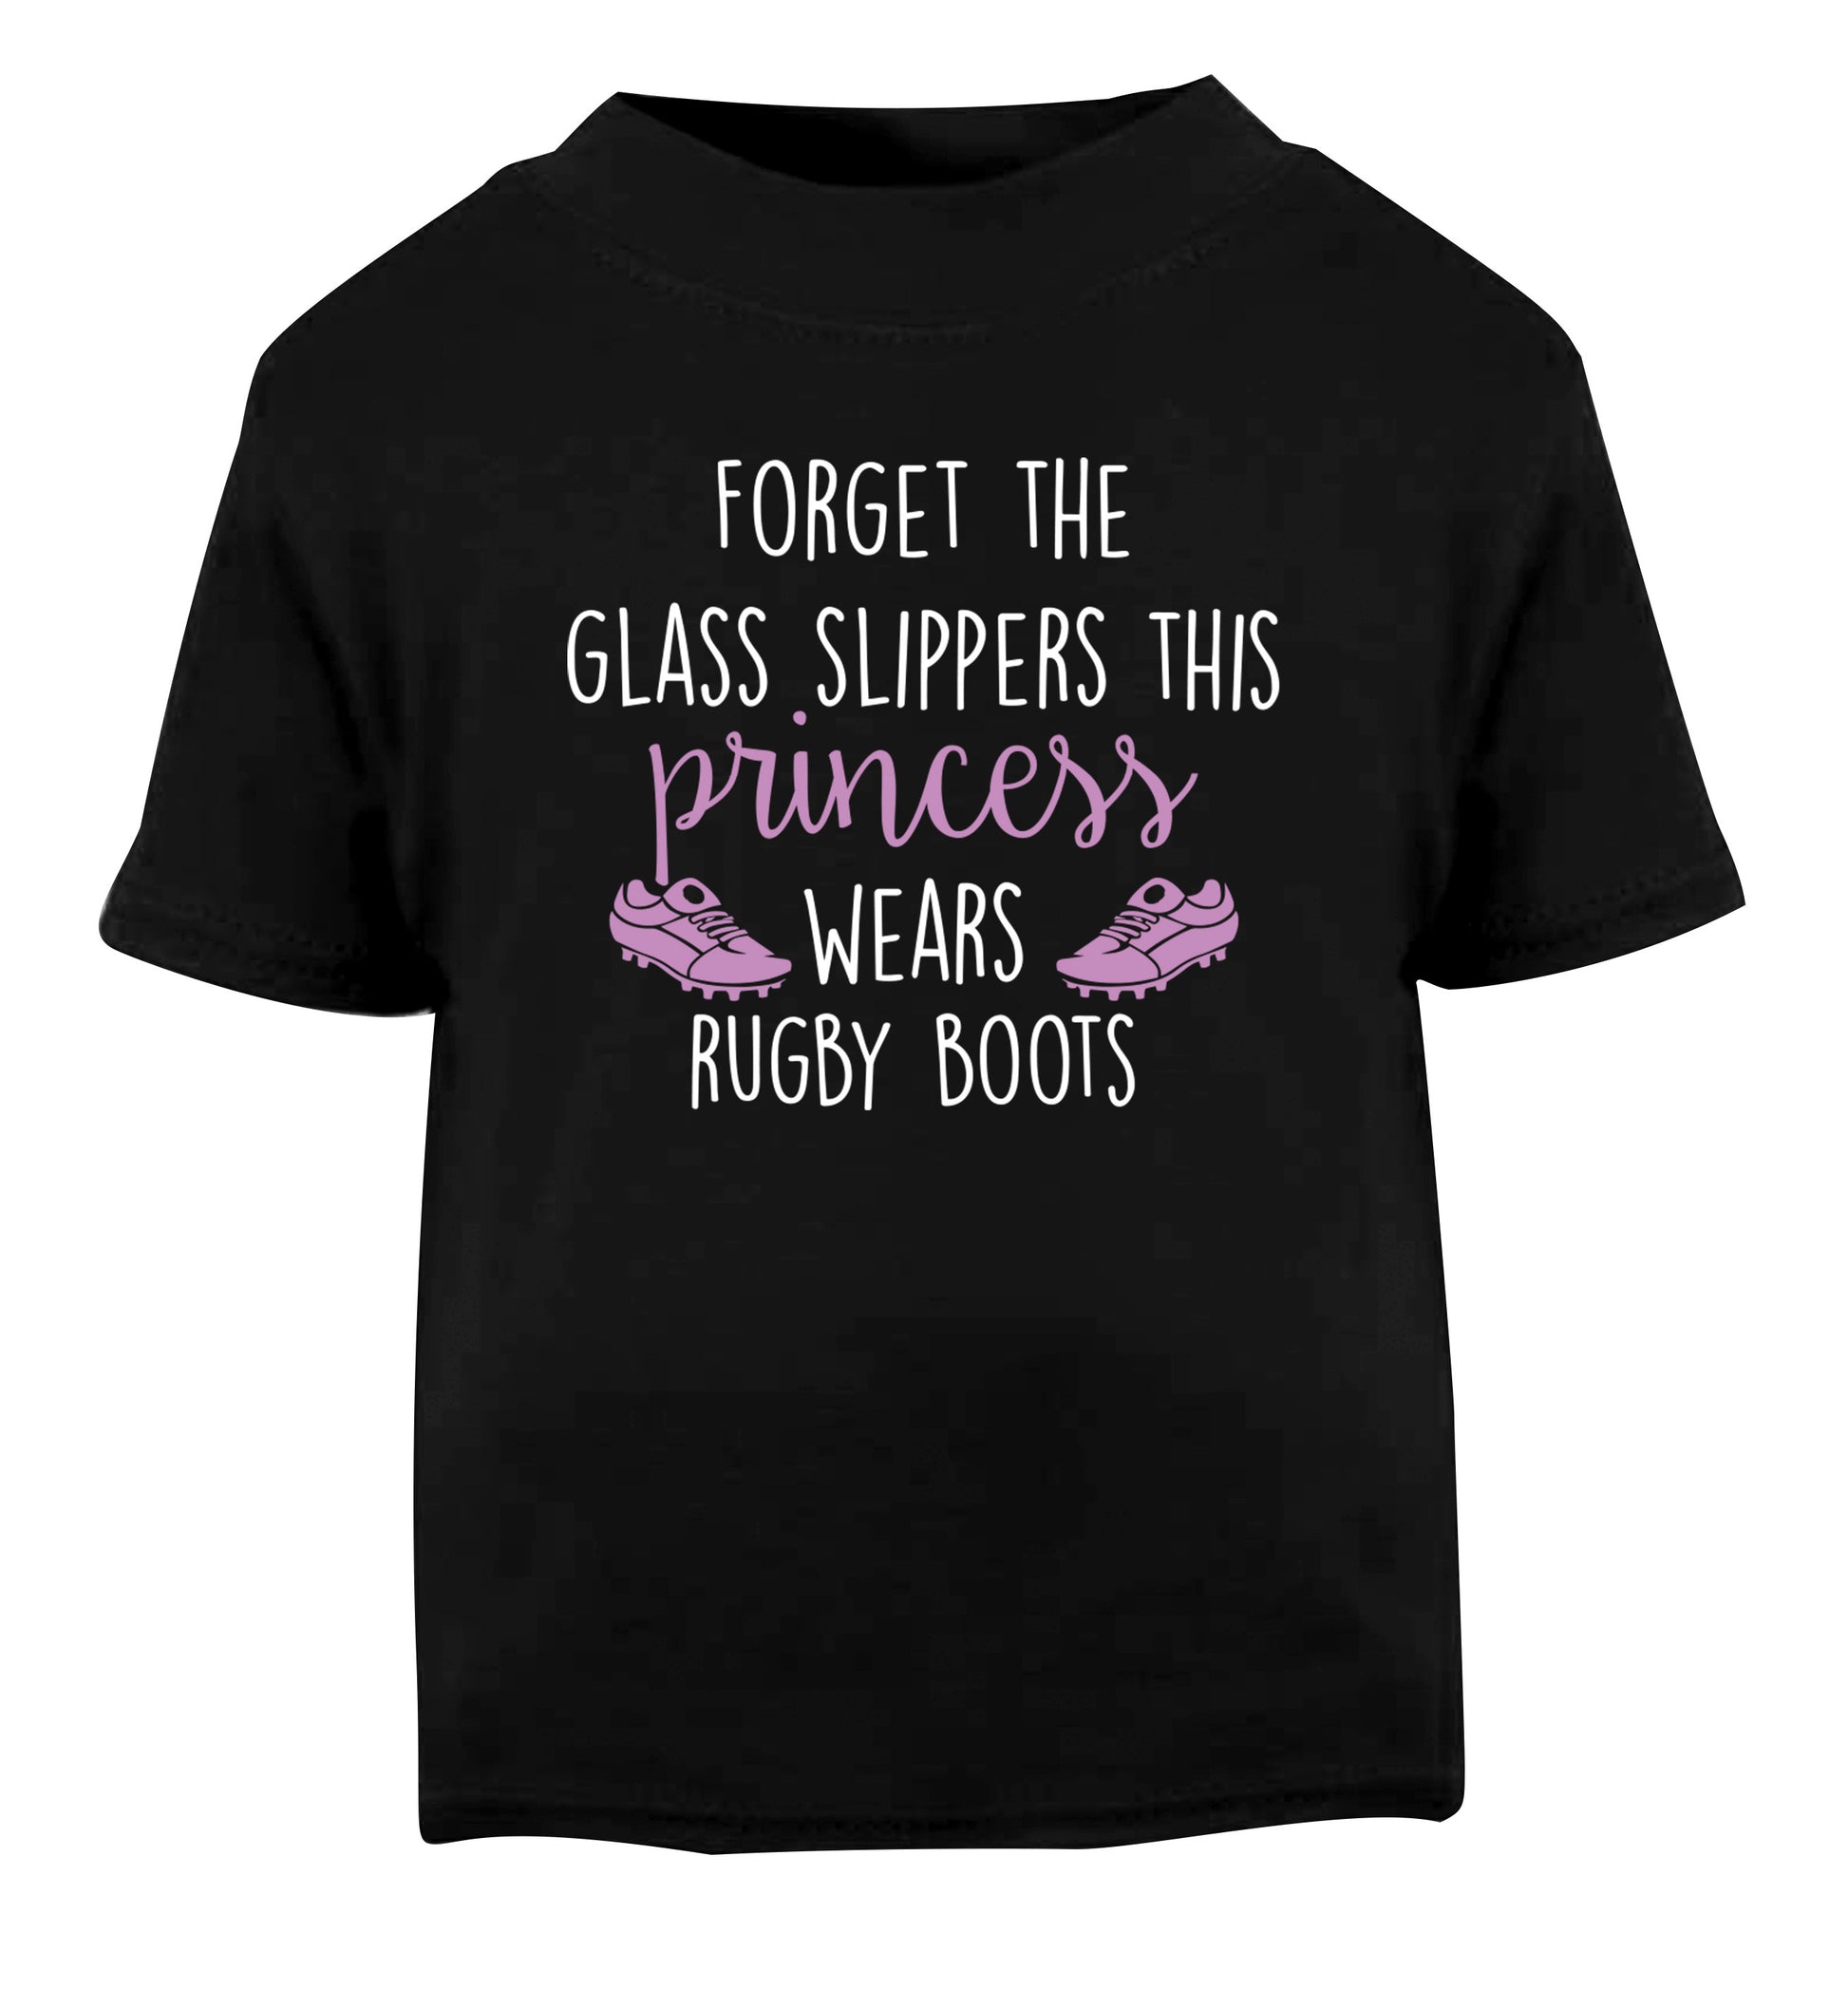 Forget the glass slippers this princess wears rugby boots Black Baby Toddler Tshirt 2 years